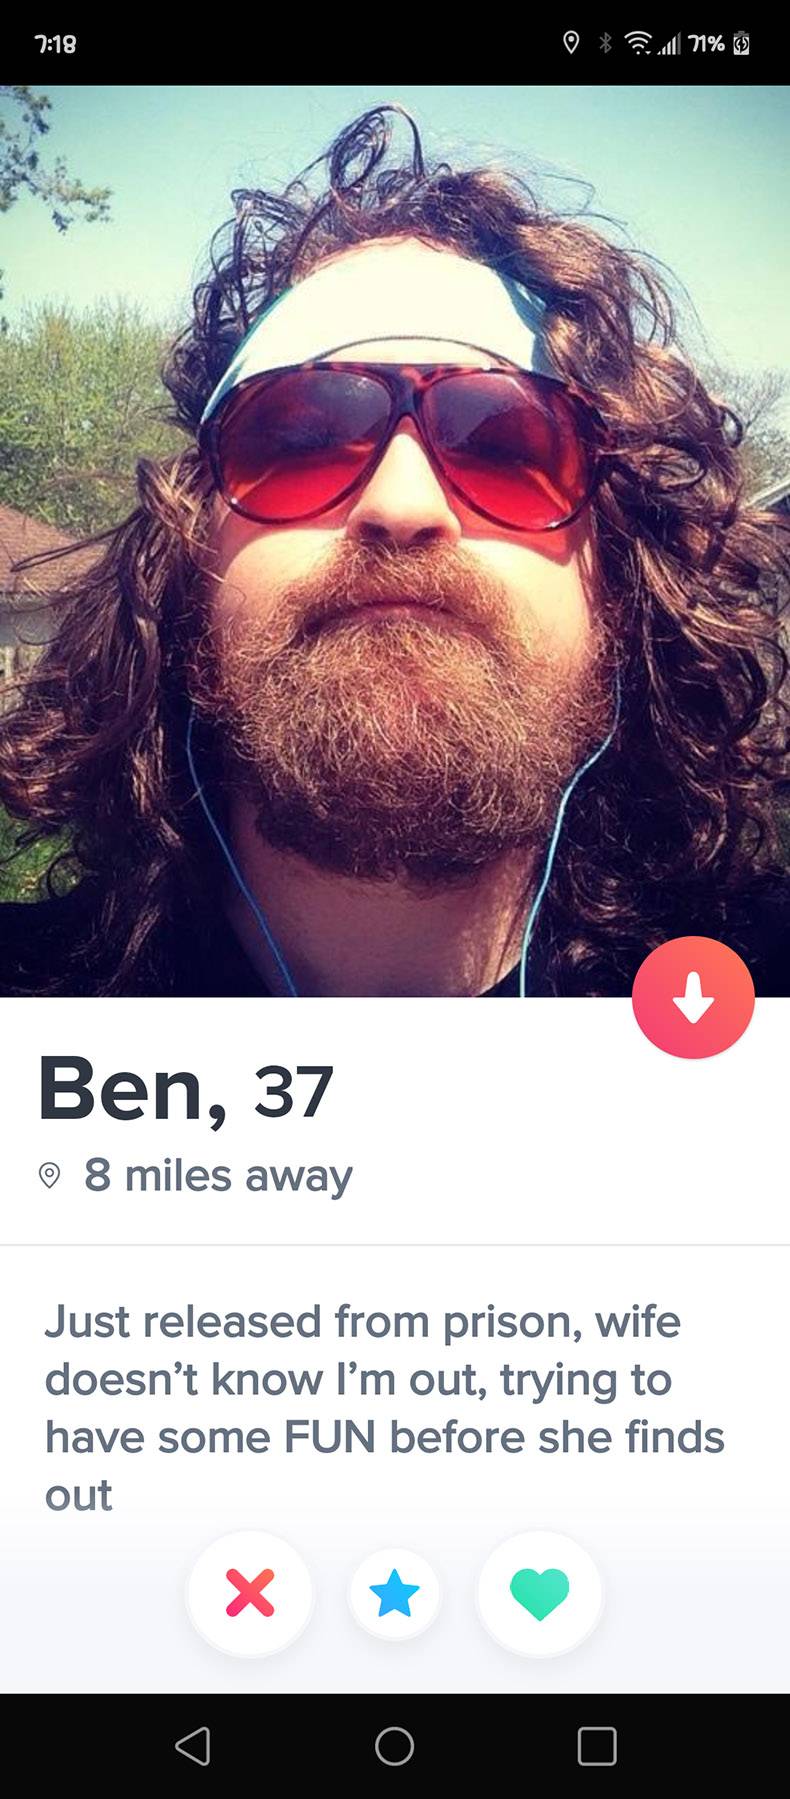 funny random pics - beard - wil 71% Ben, 37 8 miles away Just released from prison, wife doesn't know I'm out, trying to have some Fun before she finds out X O